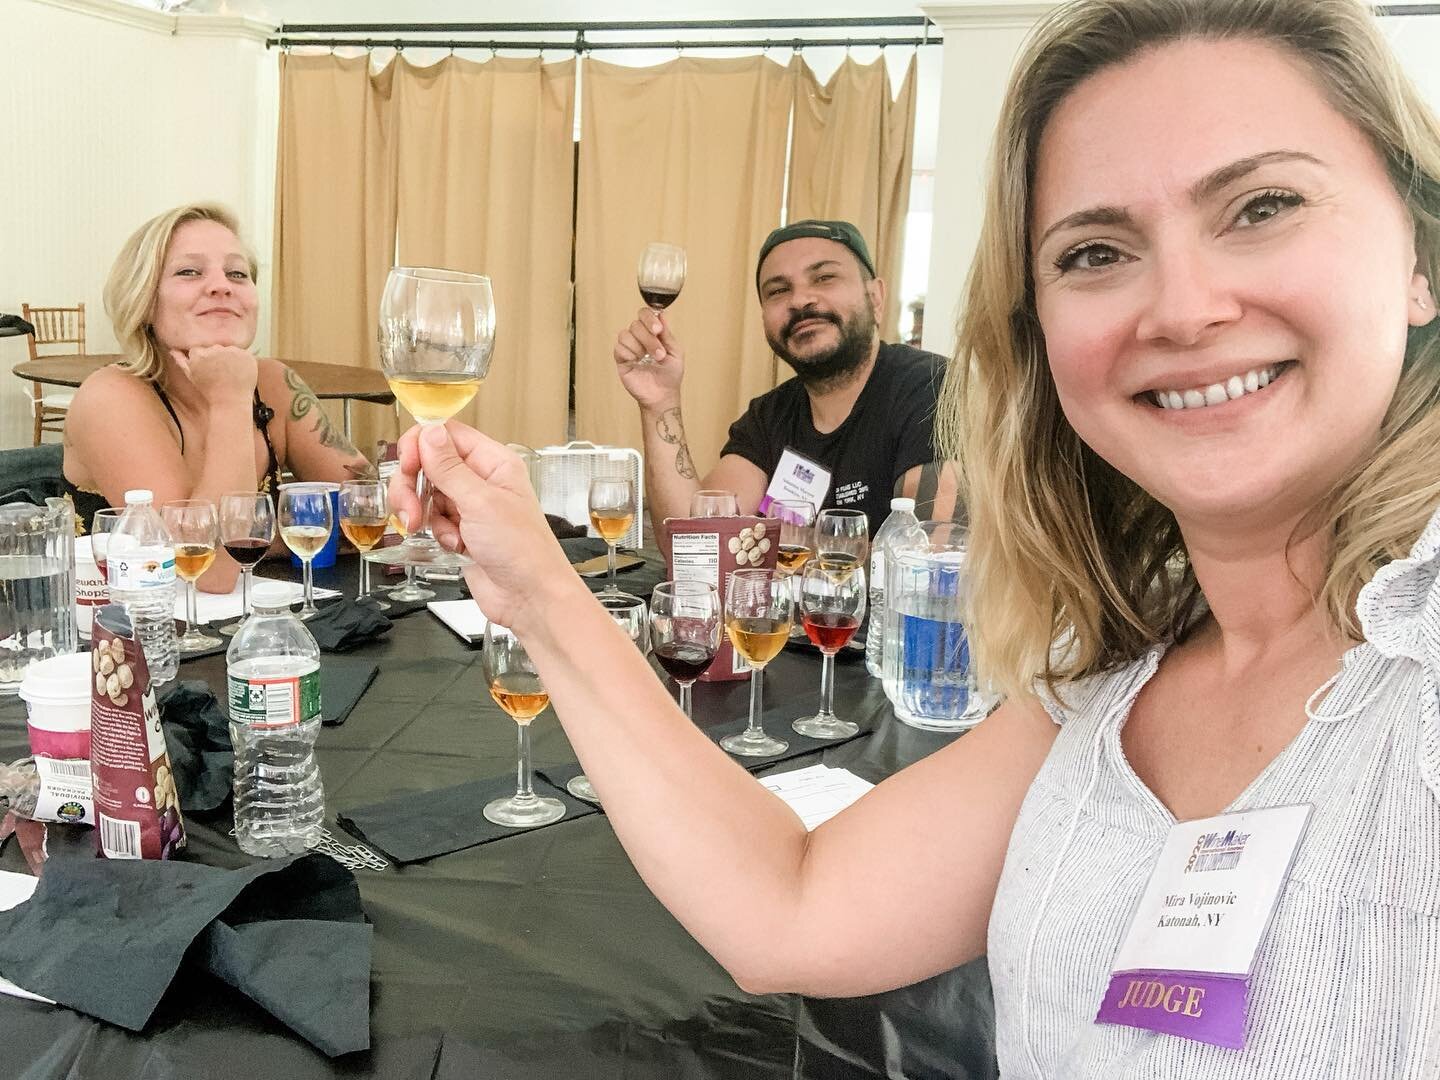 This weekend I was invited to judge the amateur winemaking competition for @winemakermag in Manchester, VT.⁣
⁣
Over three days, 30 judges evaluated 2,519 wines from 6 countries under a tent at the @hildenethelincolnfamilyhome . The WineMaker Internat